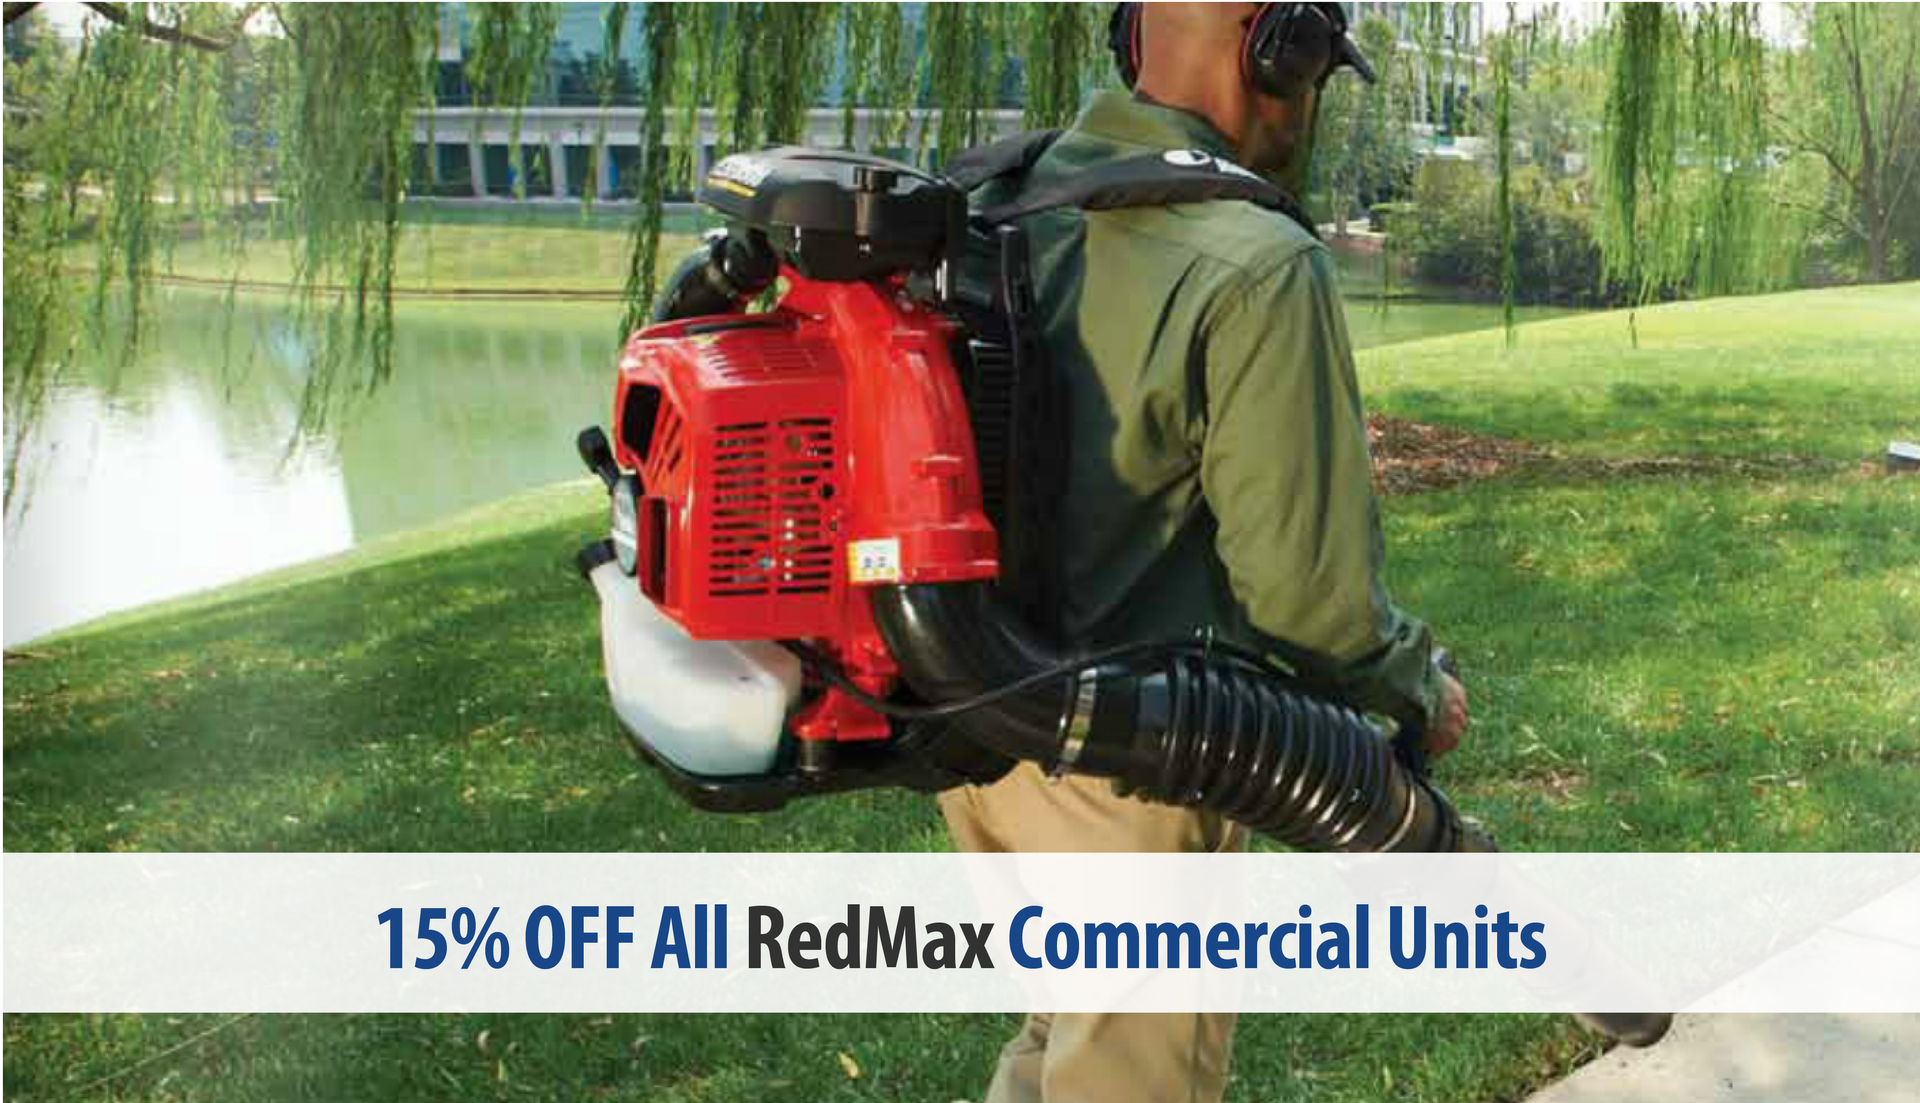 20% OFF All RedMax Commercial Equipment